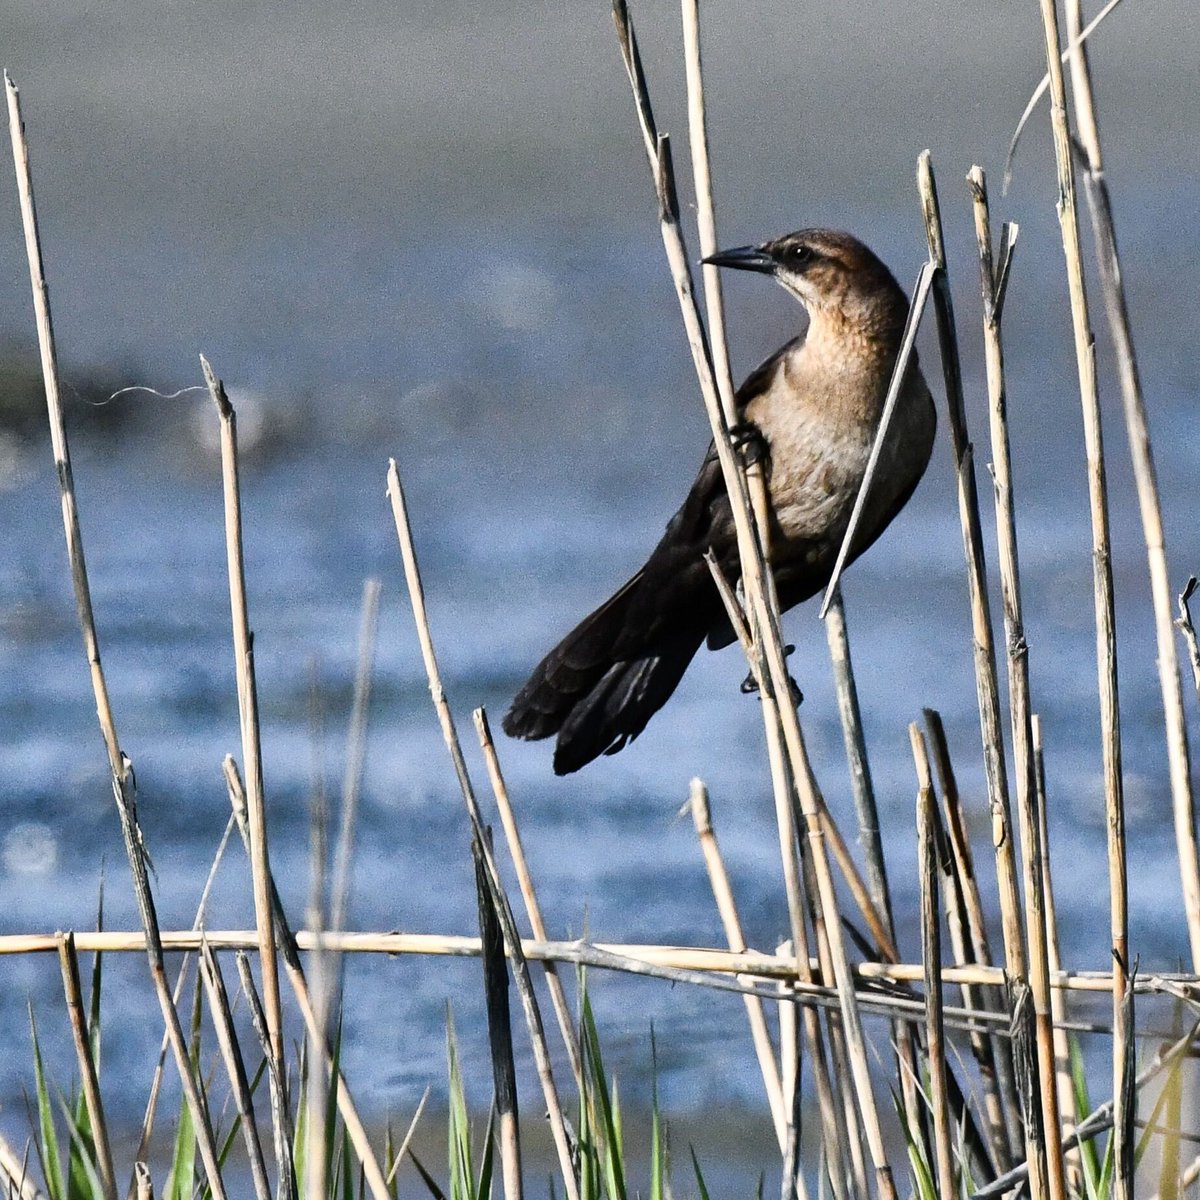 Boat-tailed Grackle observed in the Plumb Beach Salt Marsh today.